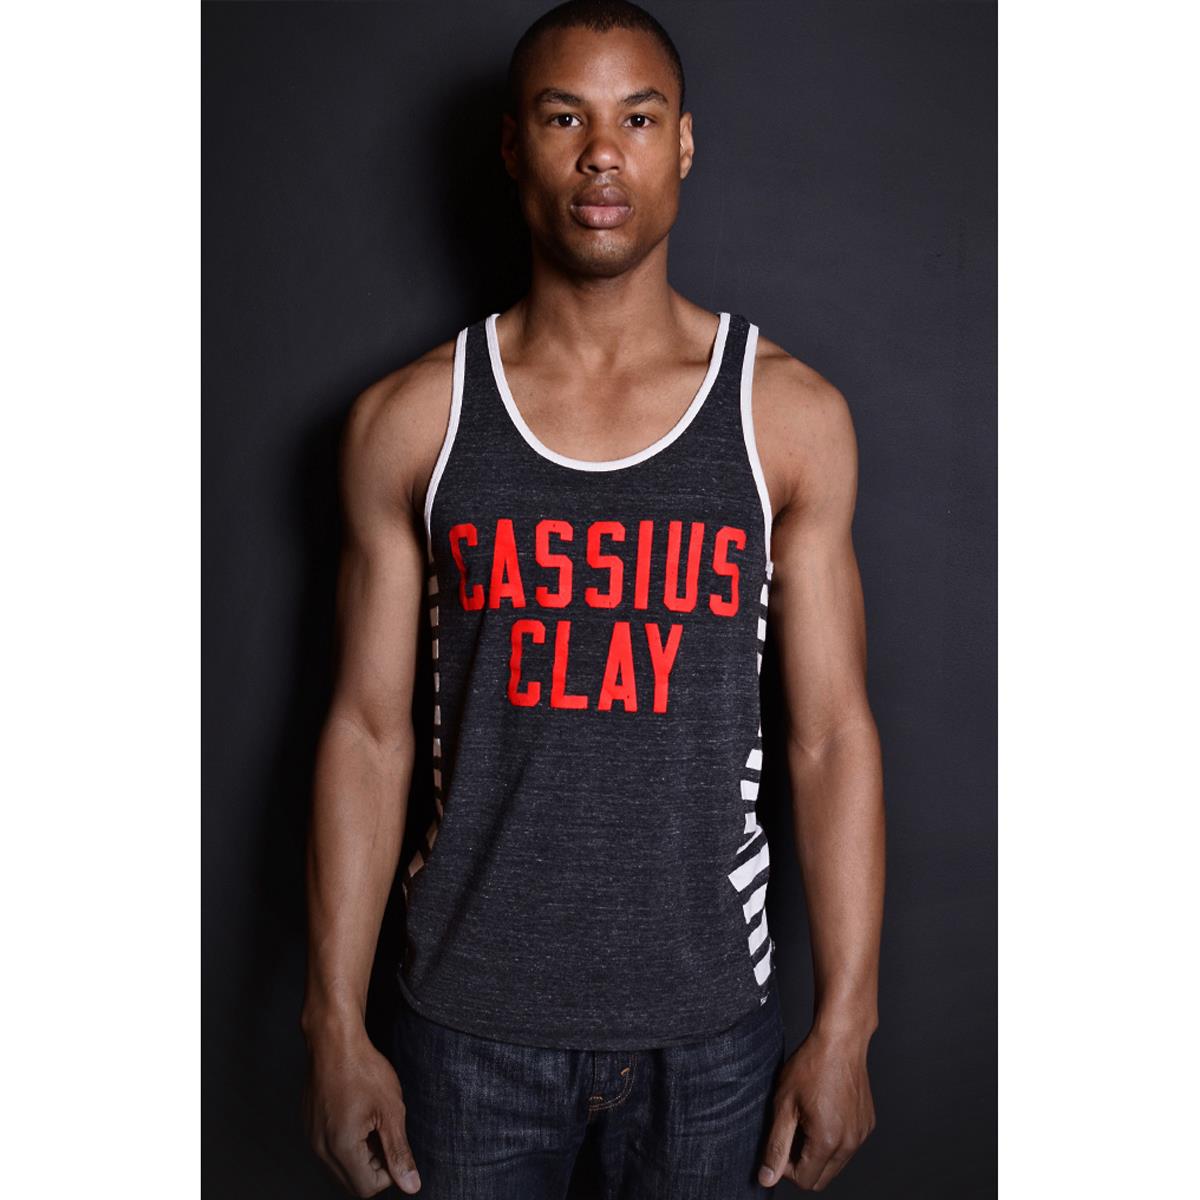 Roots of Fight Cassius Clay Striped Tank Top   3XL   Black Heather